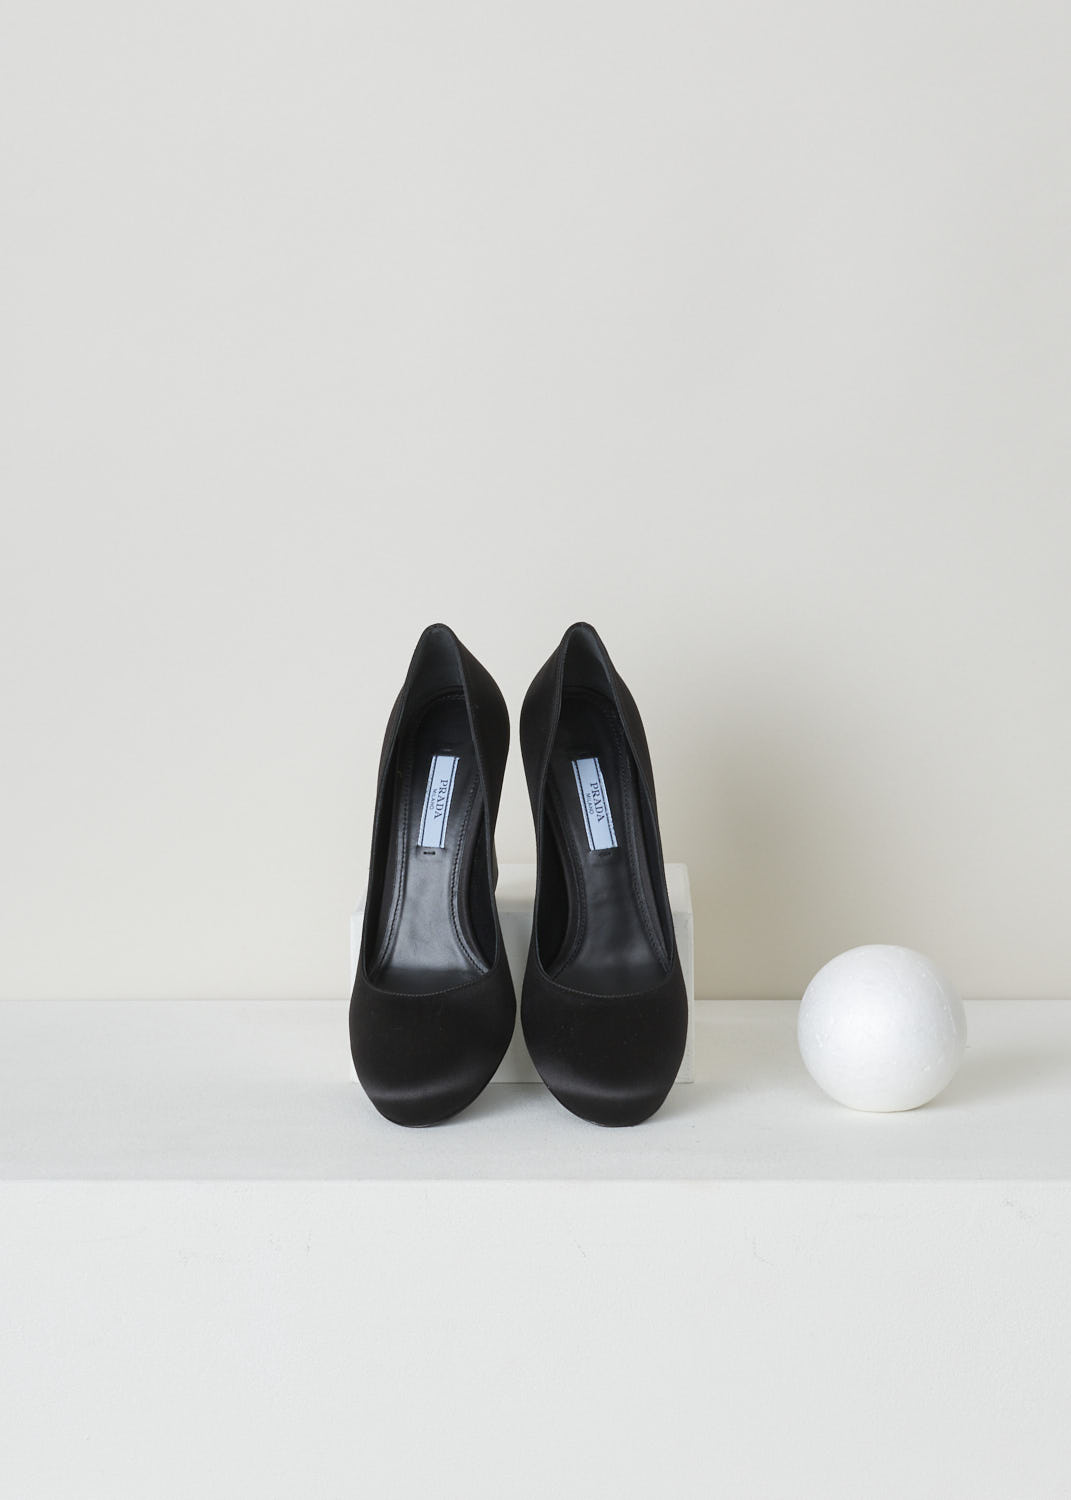 PRADA, BLACK SATIN PUMPS, 1I840L_RASO_F0002_NERO, Black, Top, Classic black pumps with a satin look. This model features a rounded toe box and a sturdy block heel.

Heel height: 8 cm / 3.14 inch.
